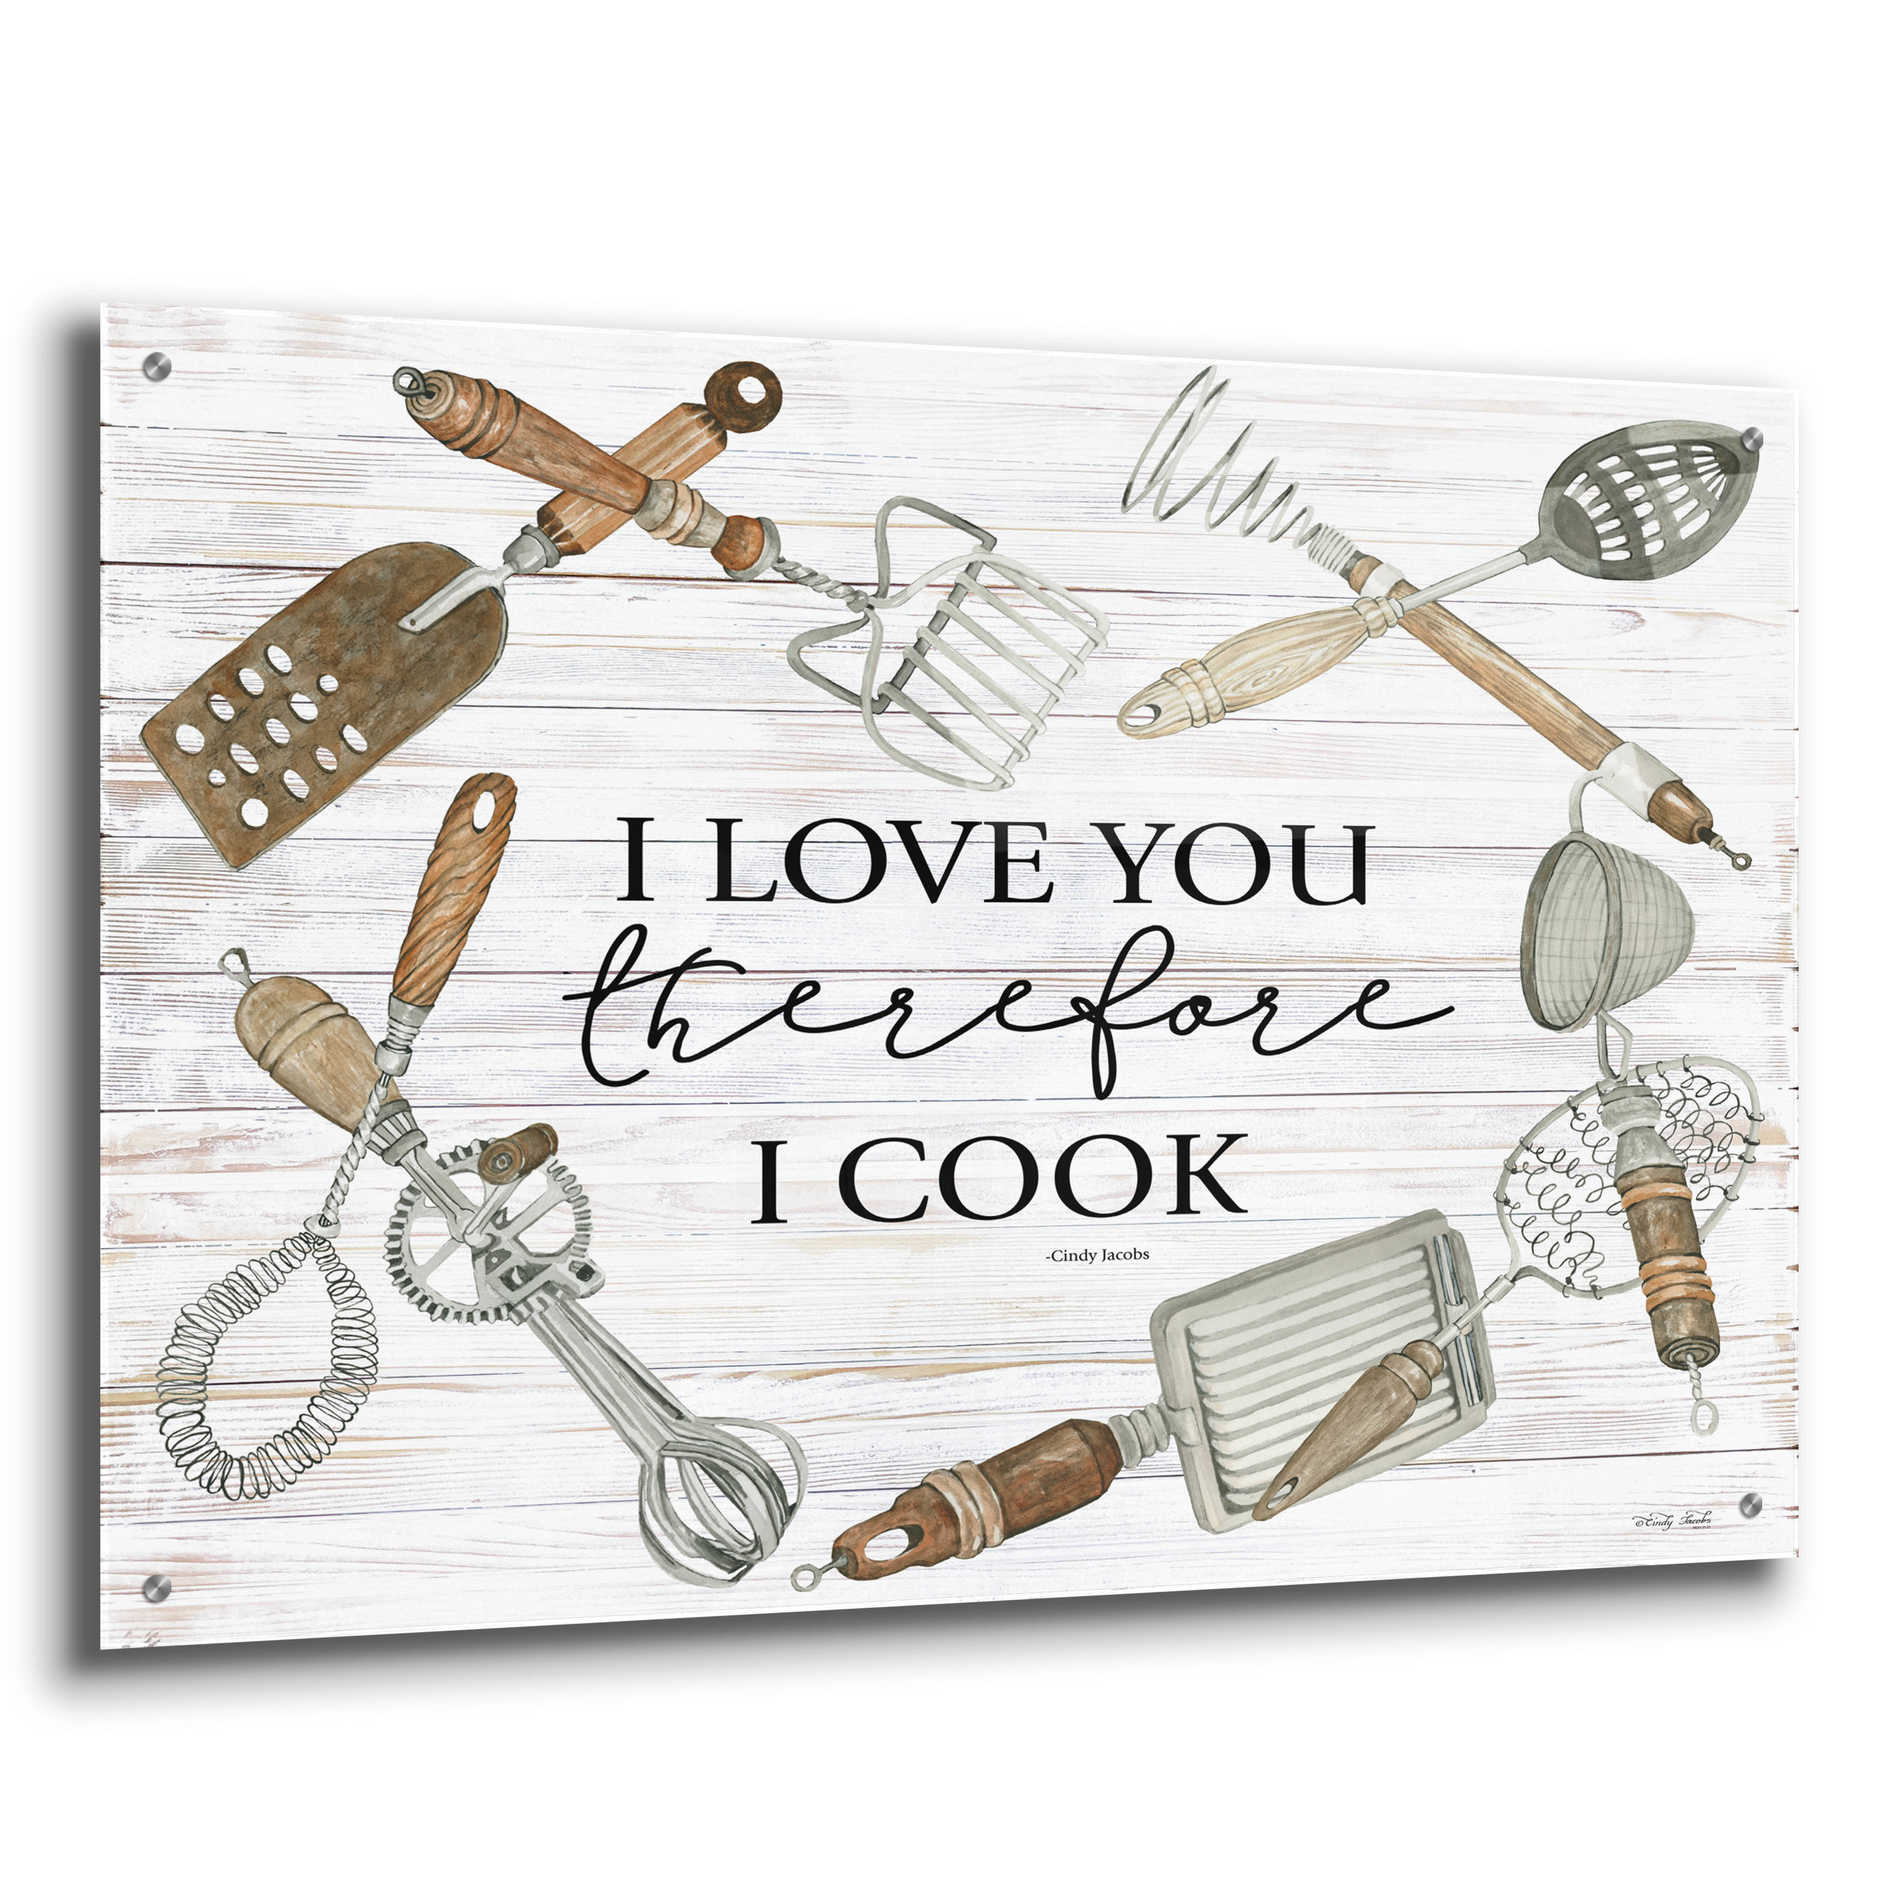 Epic Art 'I Love You Therefore I Cook' by Cindy Jacobs, Acrylic Glass Wall Art,36x24